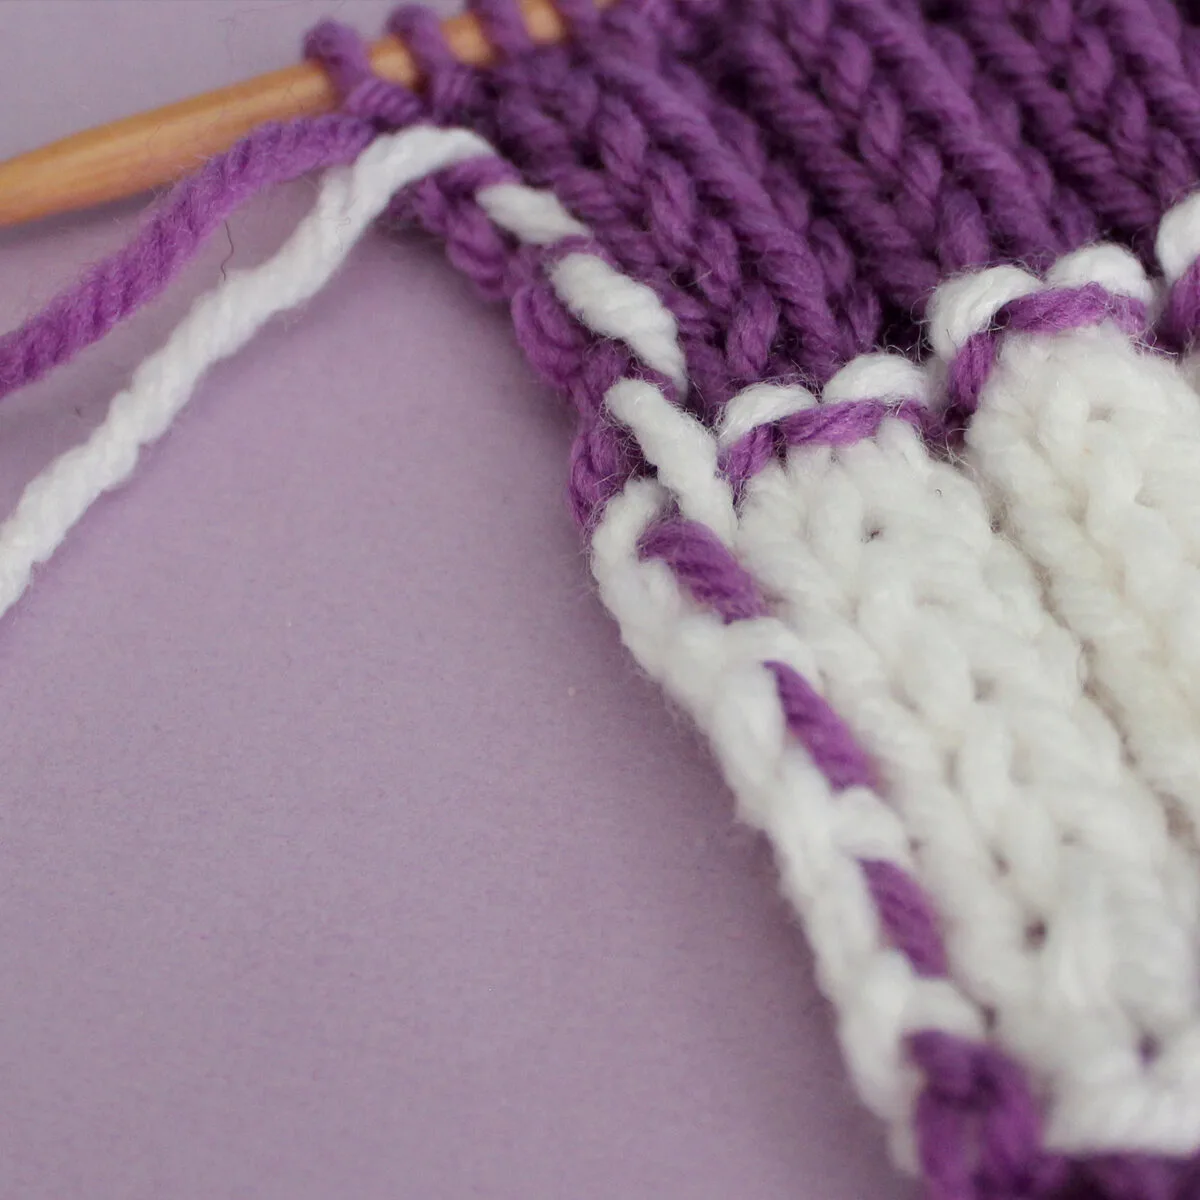 Yarn Carried up the side of a knitted swatch in stripes of purple and white colored yarn.